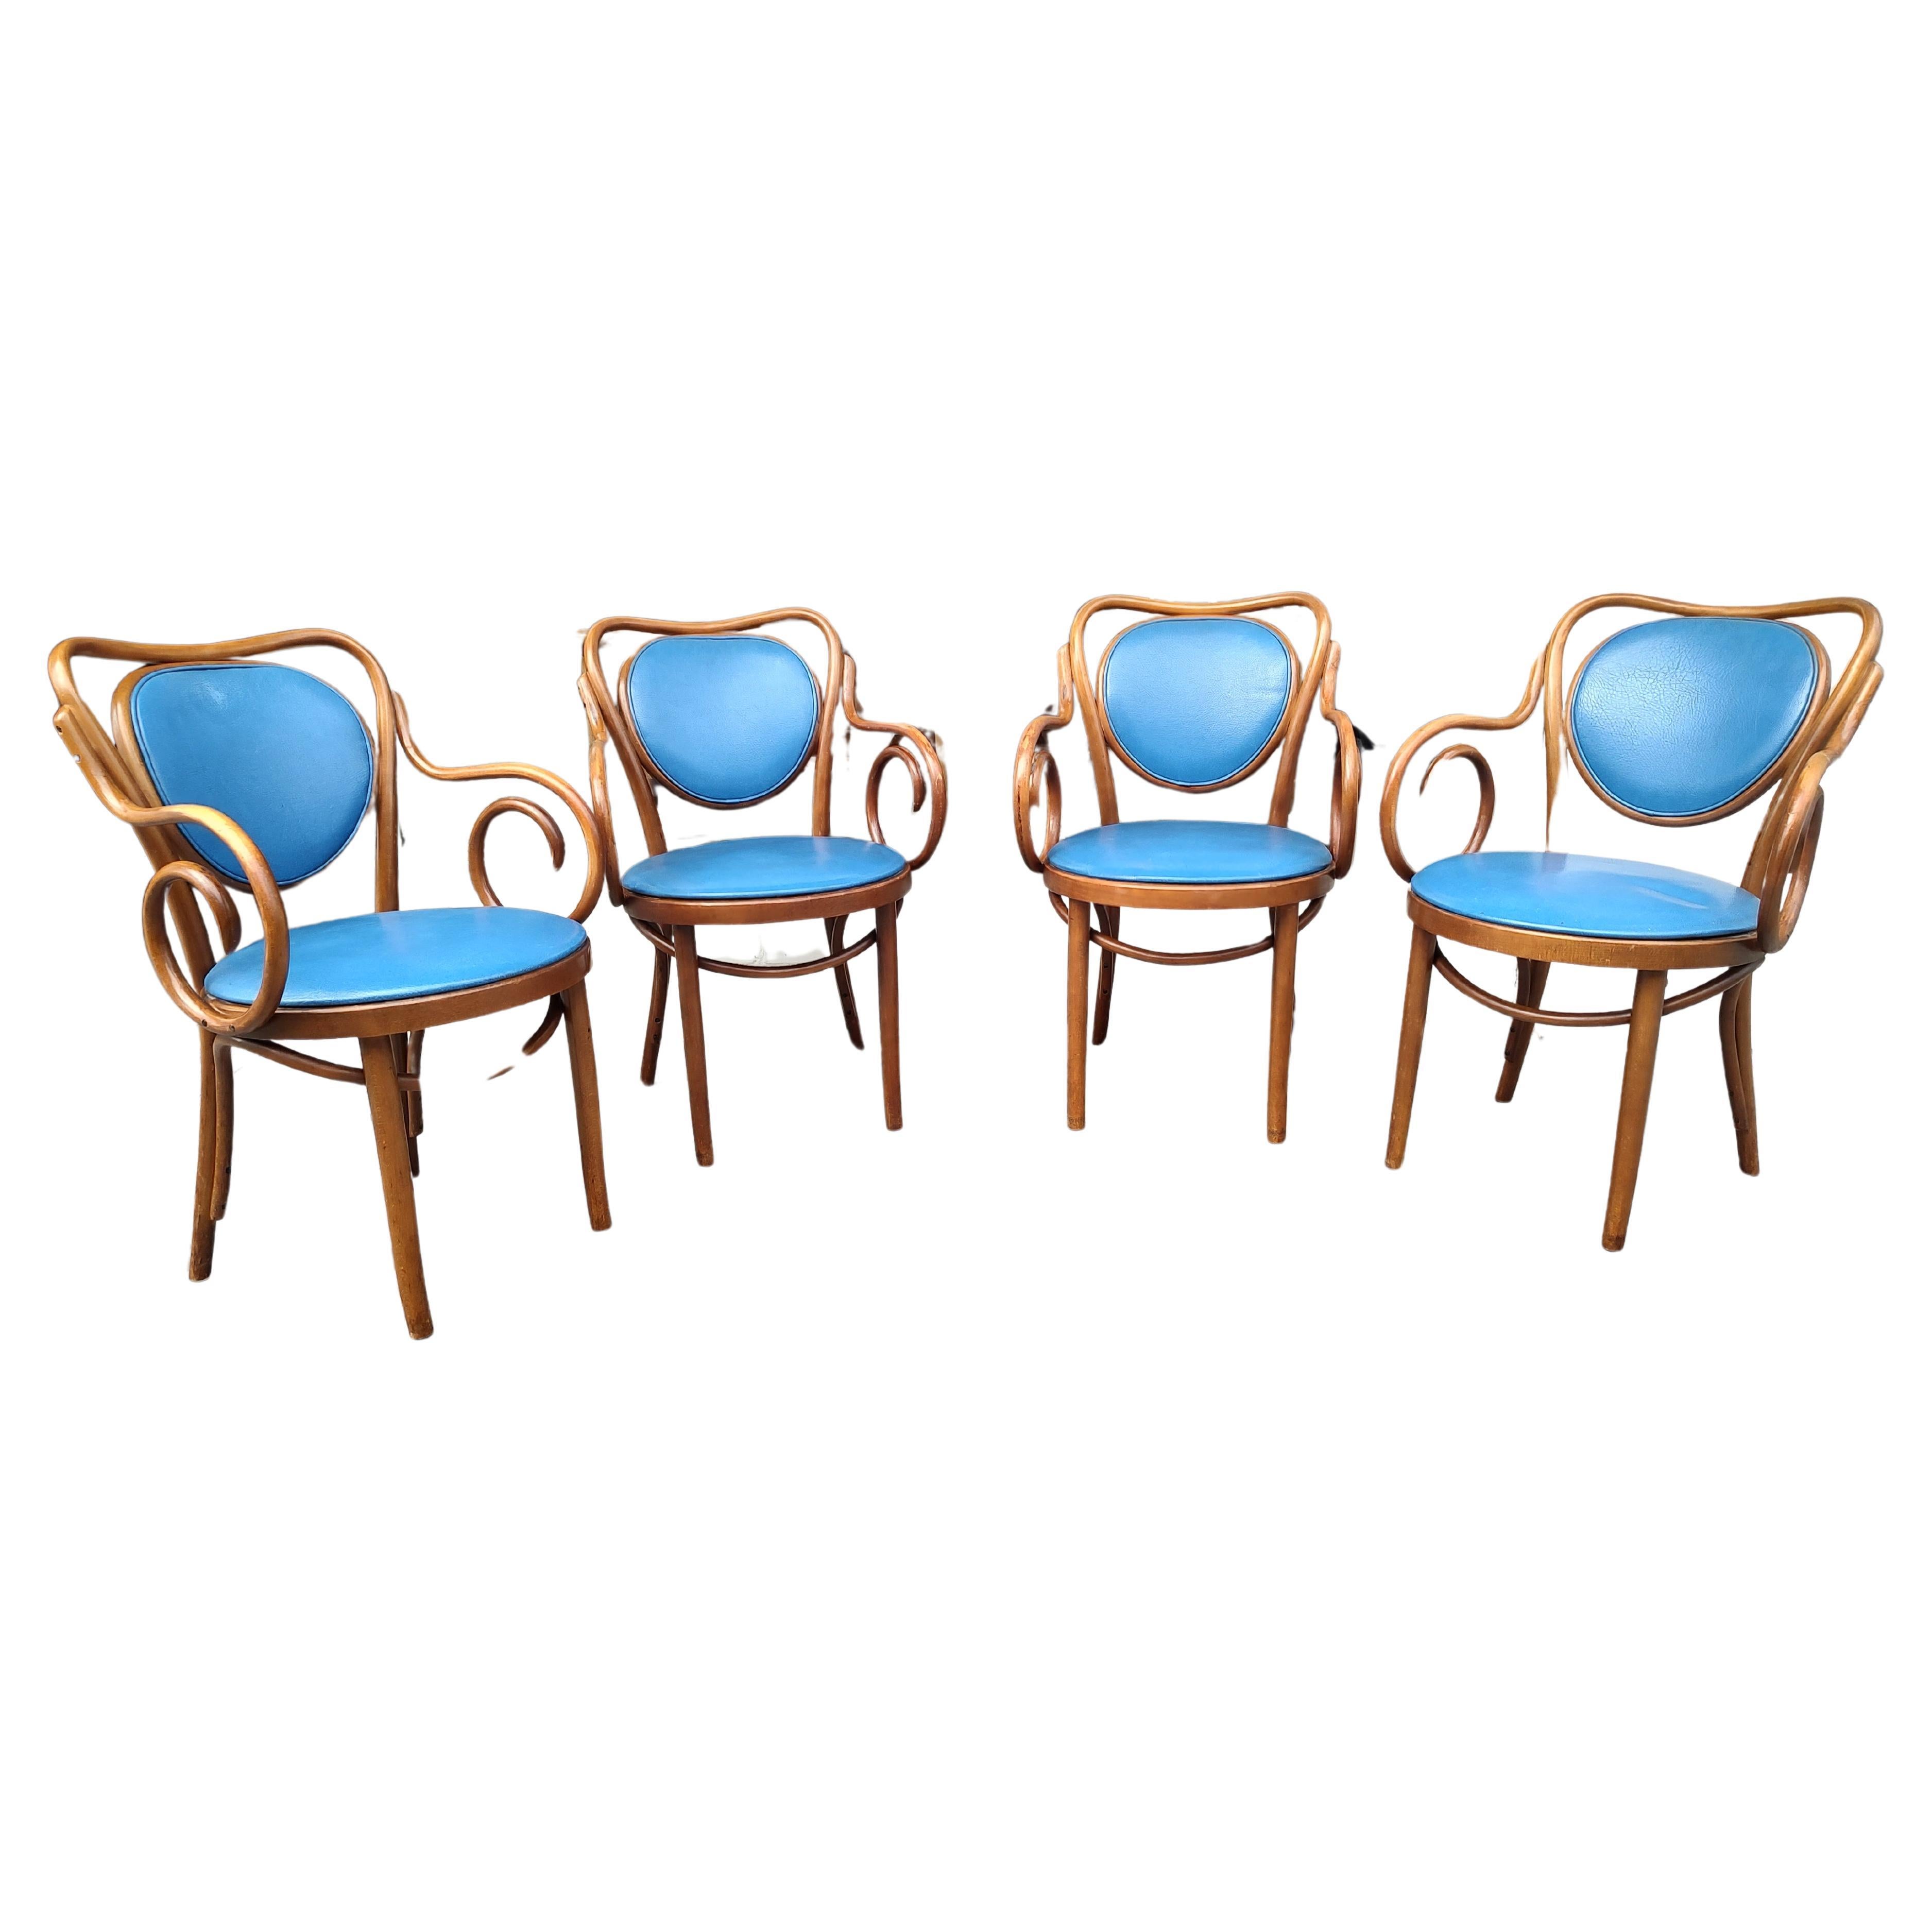 Fabulous set of 4 fancy bentwood Thonet Style upholstered armchairs. In excellent vintage condition with minimal wear. Blue vinyl is a vibrant color and is easily changed out. Chairs are also very comfy.